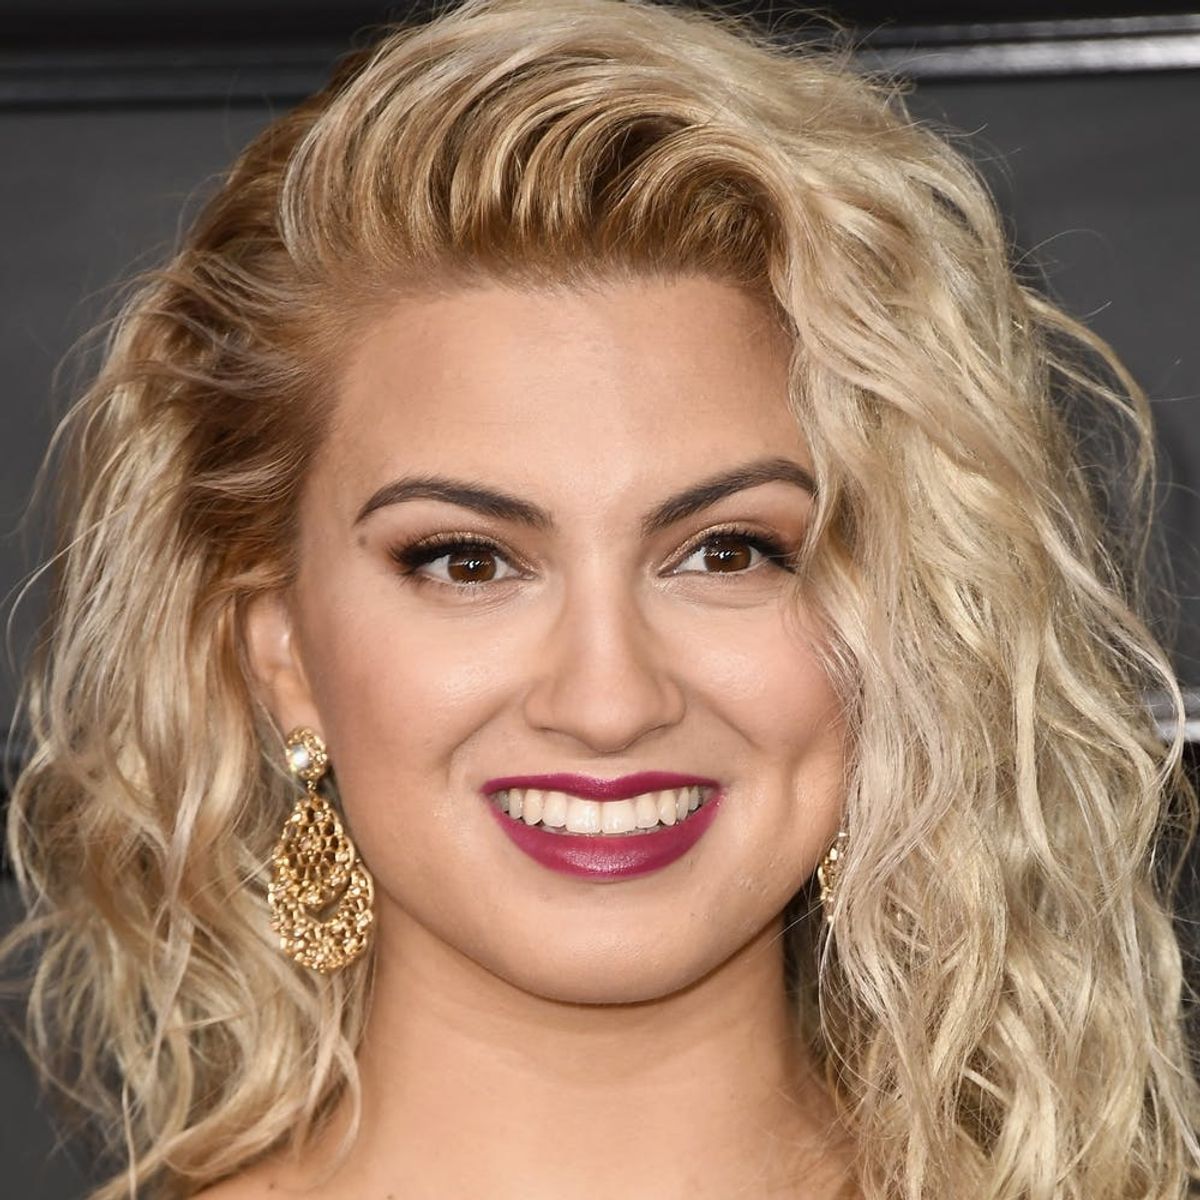 Singer Tori Kelly Is Engaged: See the Adorable Pics!